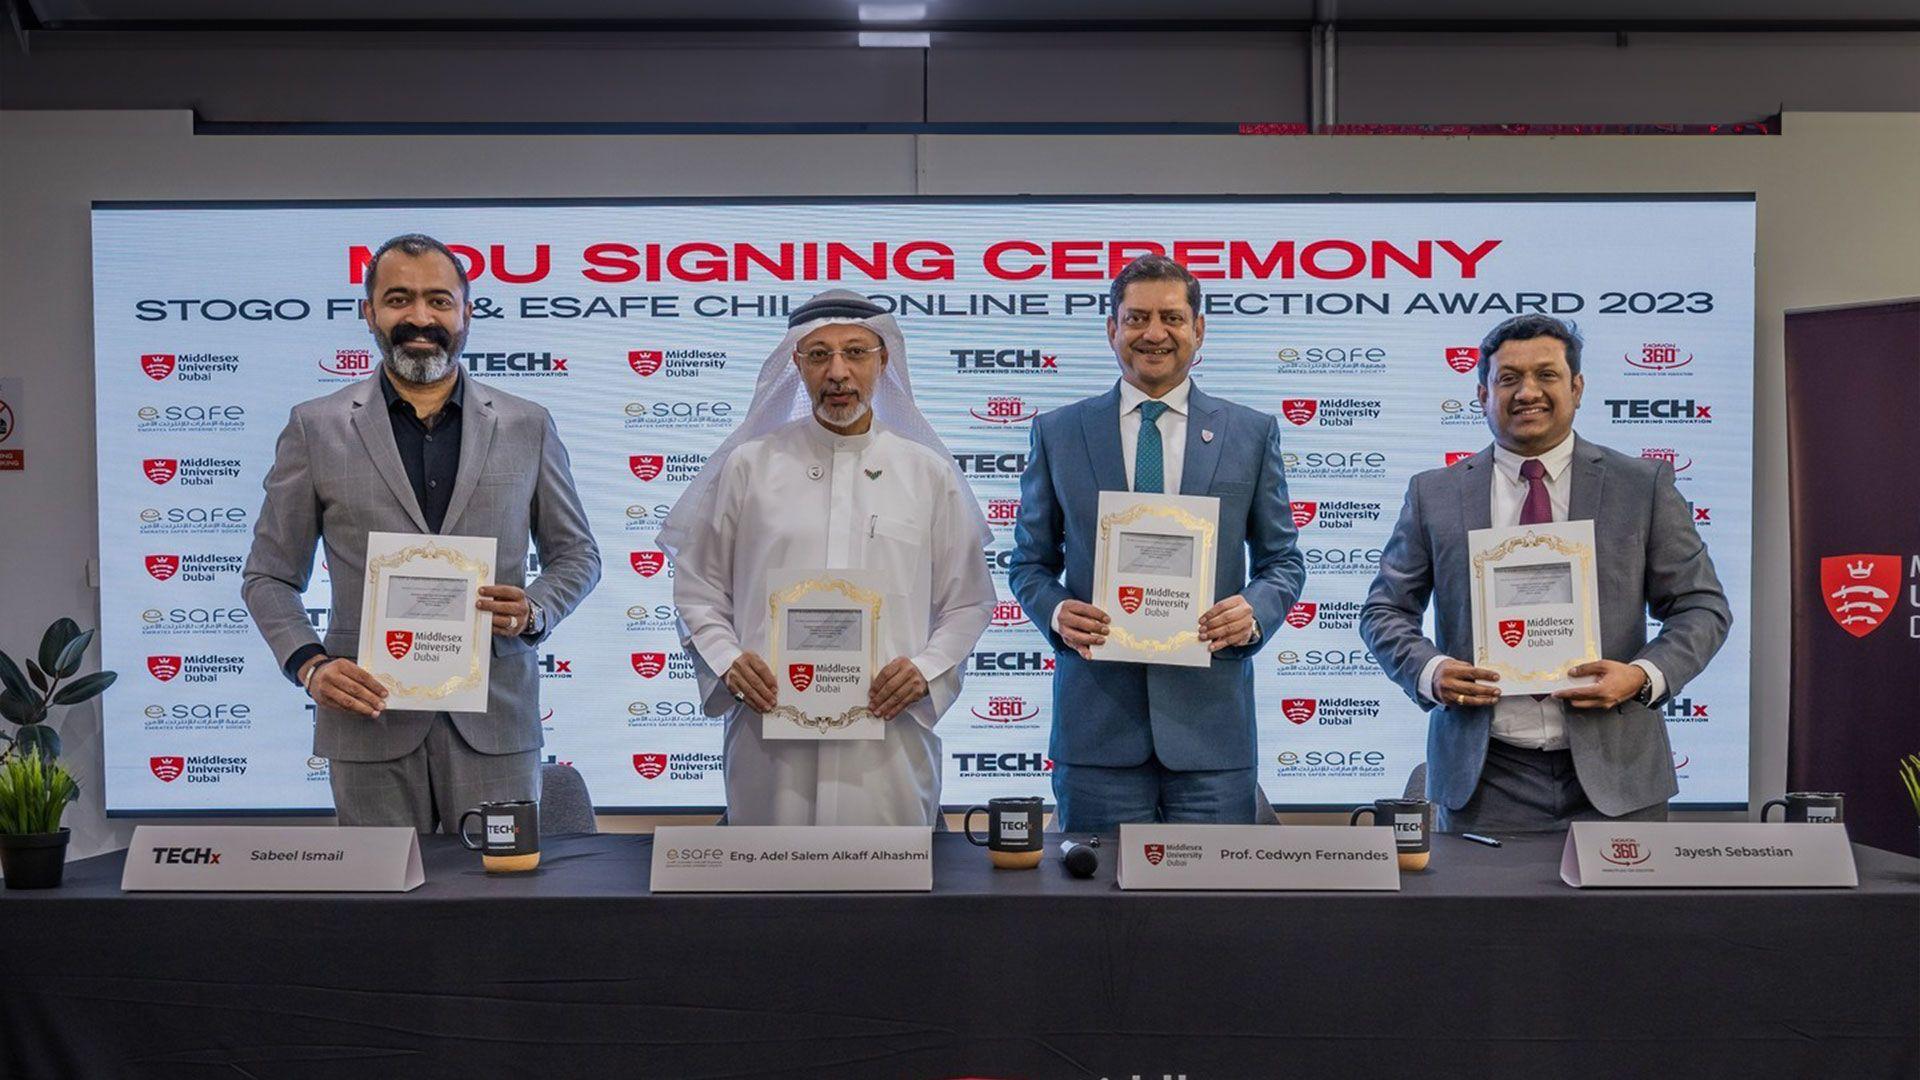 On 1 February 2024, Middlesex University Dubai were proud to formalise a Memorandum of Understanding (MoU) between eSafe, Tachyon IT Consultancy, TECHx Media and Middlesex University Dubai. The MoU acknowledges that the eSafe Child Online Protection Award 2023 and STOGO FEST events will be hosted at the Middlesex University Dubai in a collaborative move between all parties towards advancing online safety for children while nurturing their online creativity.